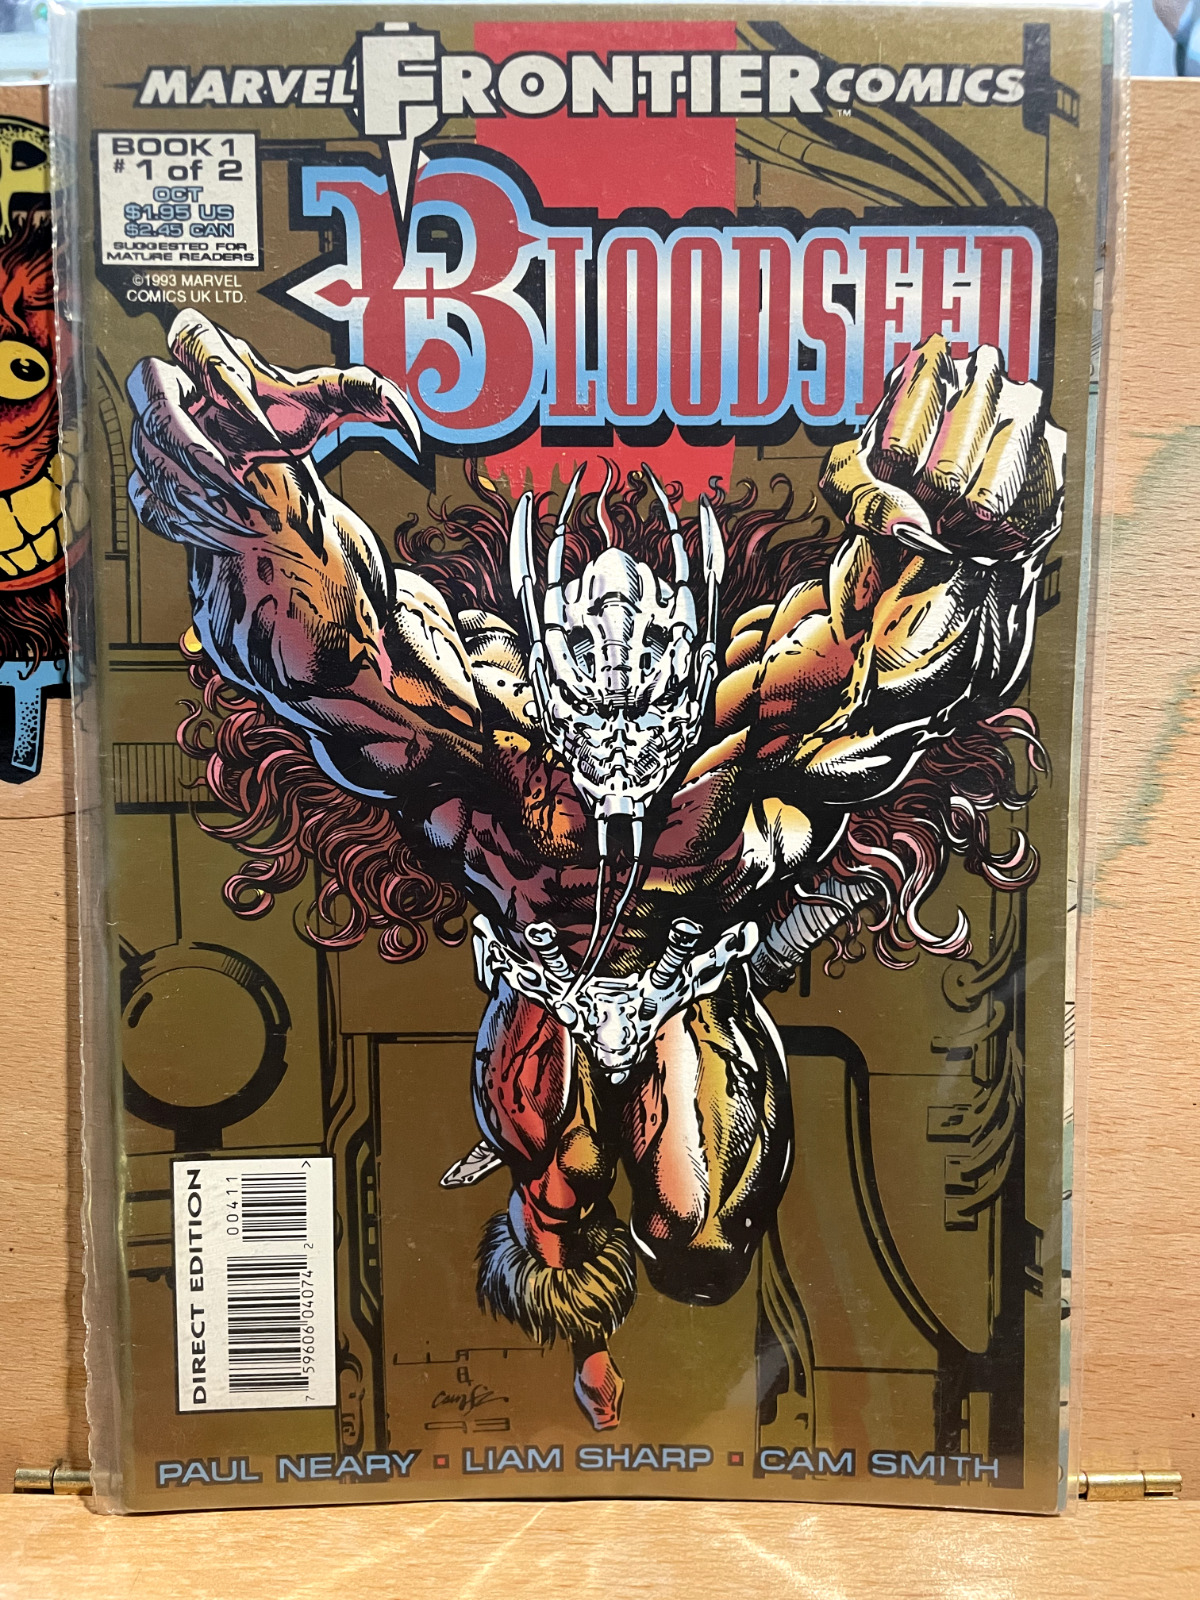 Bloodseed #1 Very Fine condition. Marvel Frontier Comics